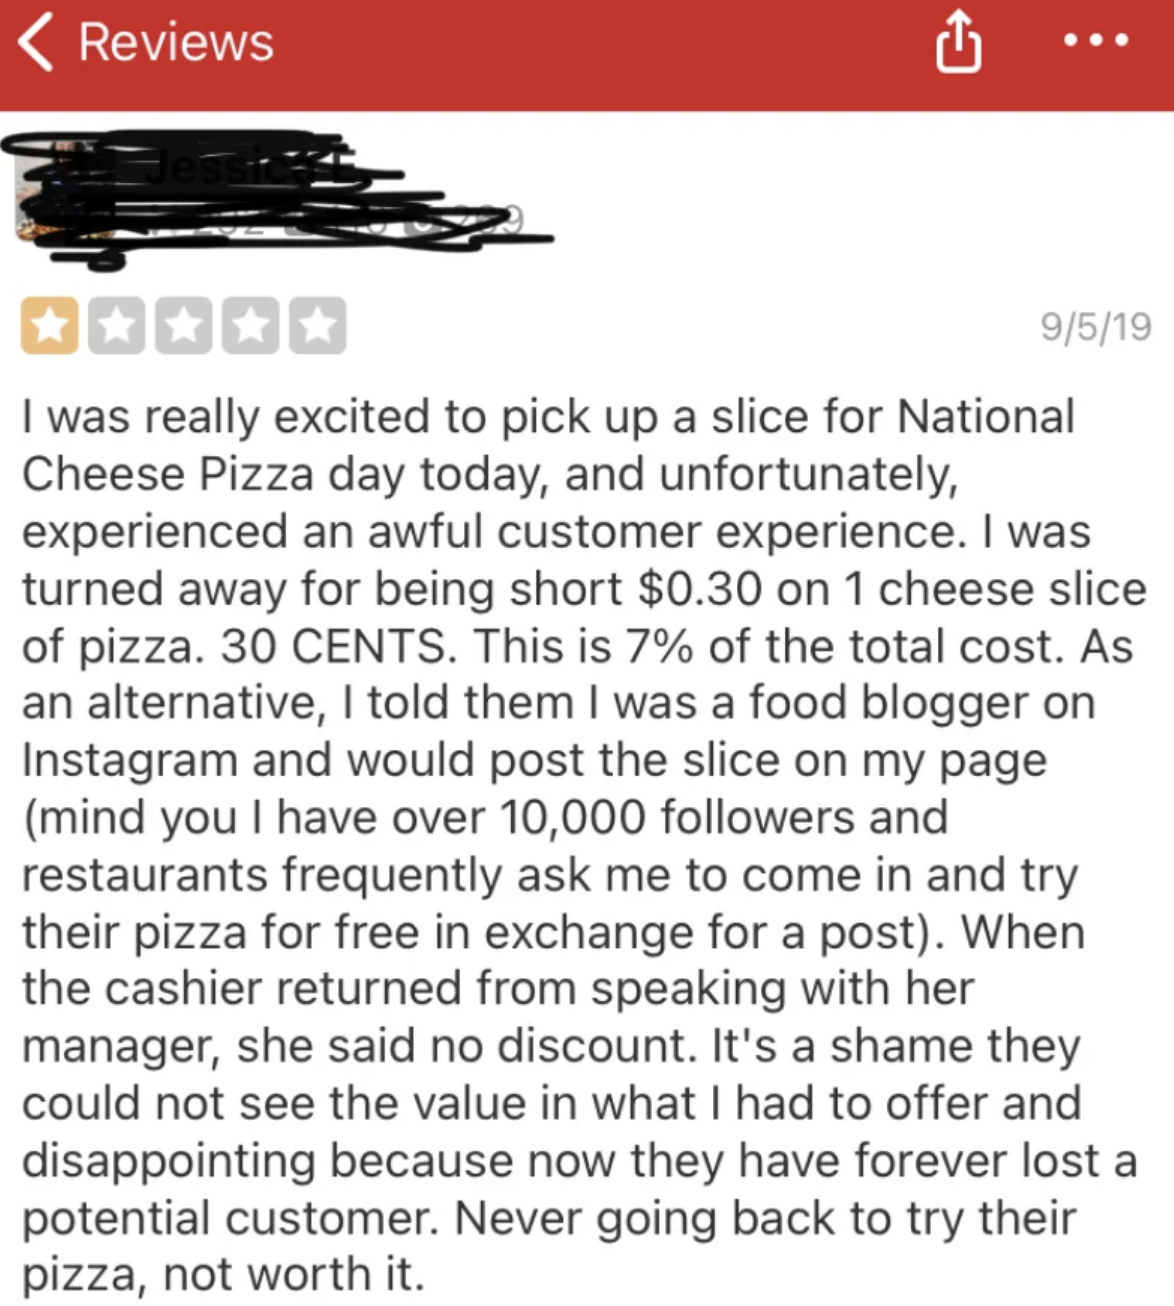 Screenshot of a Yelp review